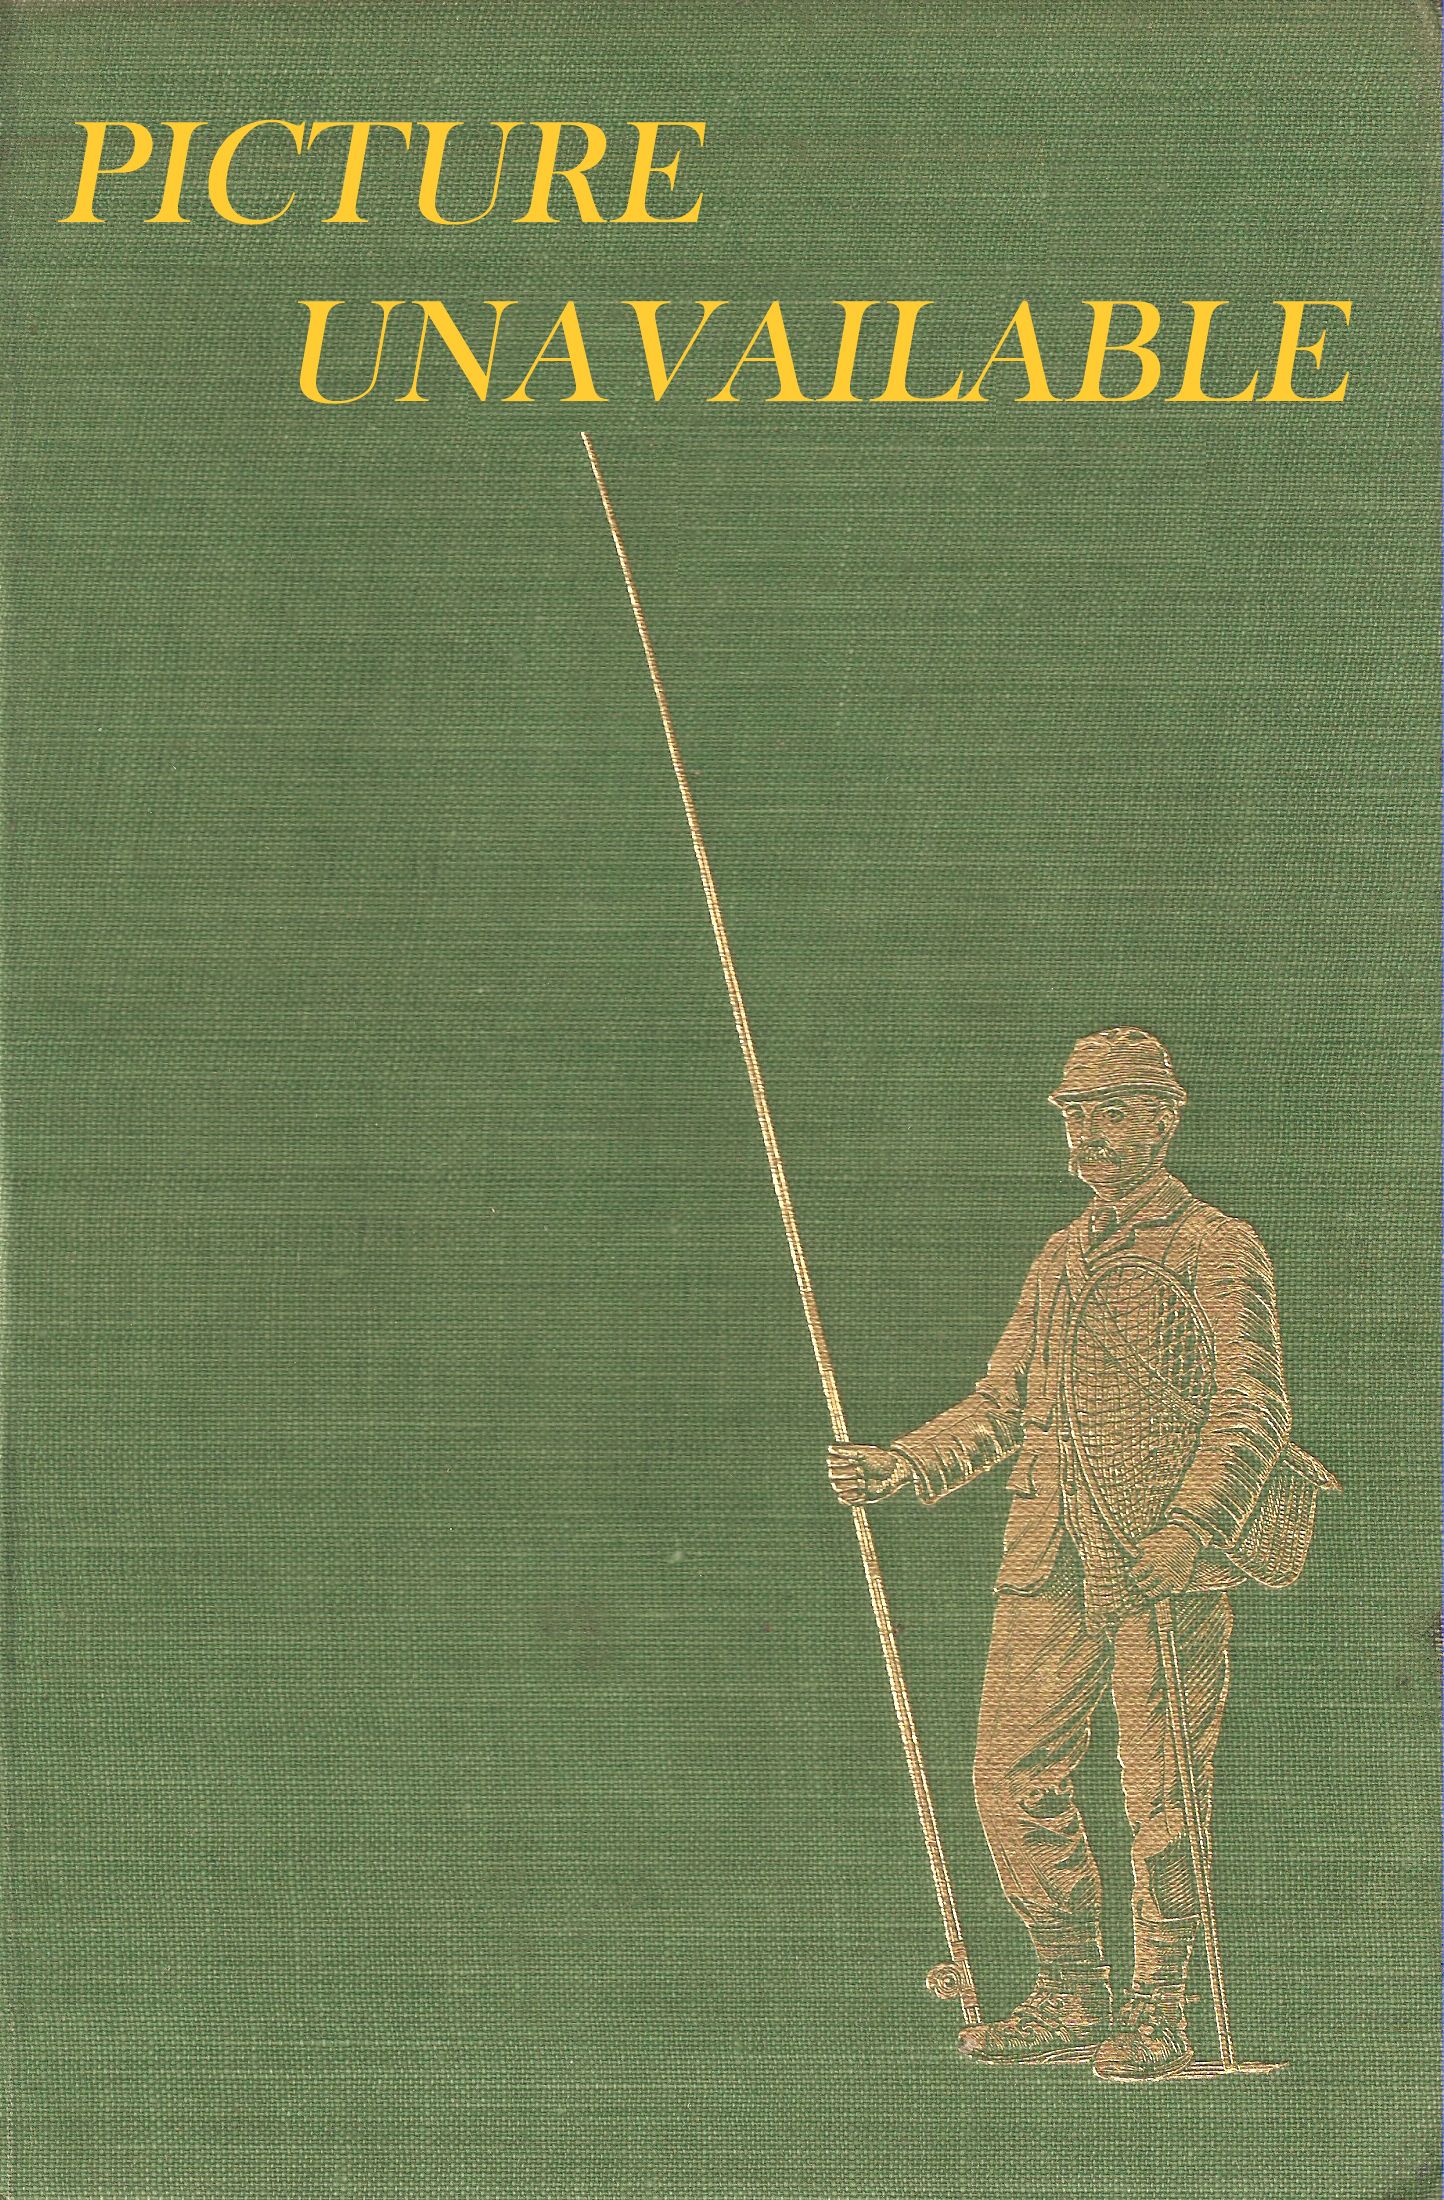 MODERN ANGLING BIBLIOGRAPHY: Books published on angling, fisheries and  fish culture from 1881 to 1945. By J. Fitzgerald Hampton.